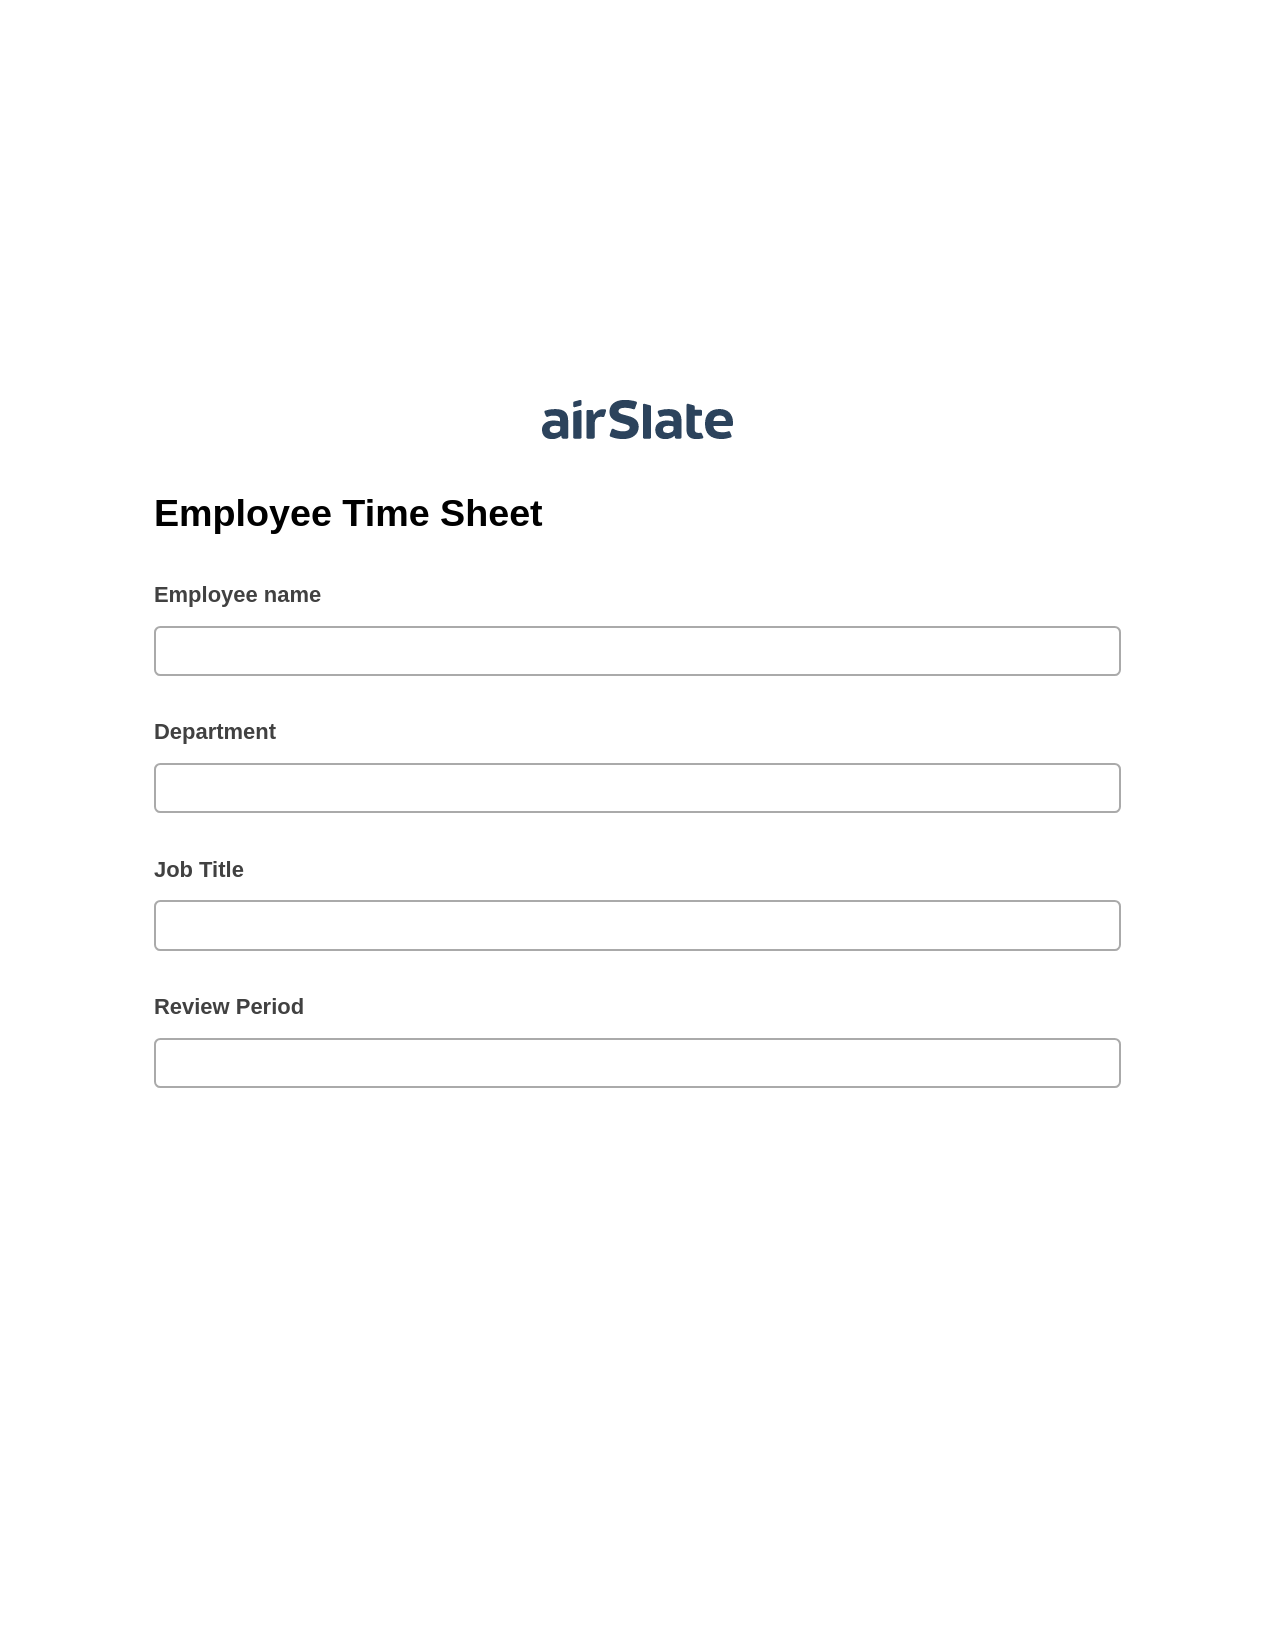 Employee Time Sheet Pre-fill from Salesforce Records with SOQL Bot, Send a Slate to MS Dynamics 365 Contact Bot, Post-finish Document Bot